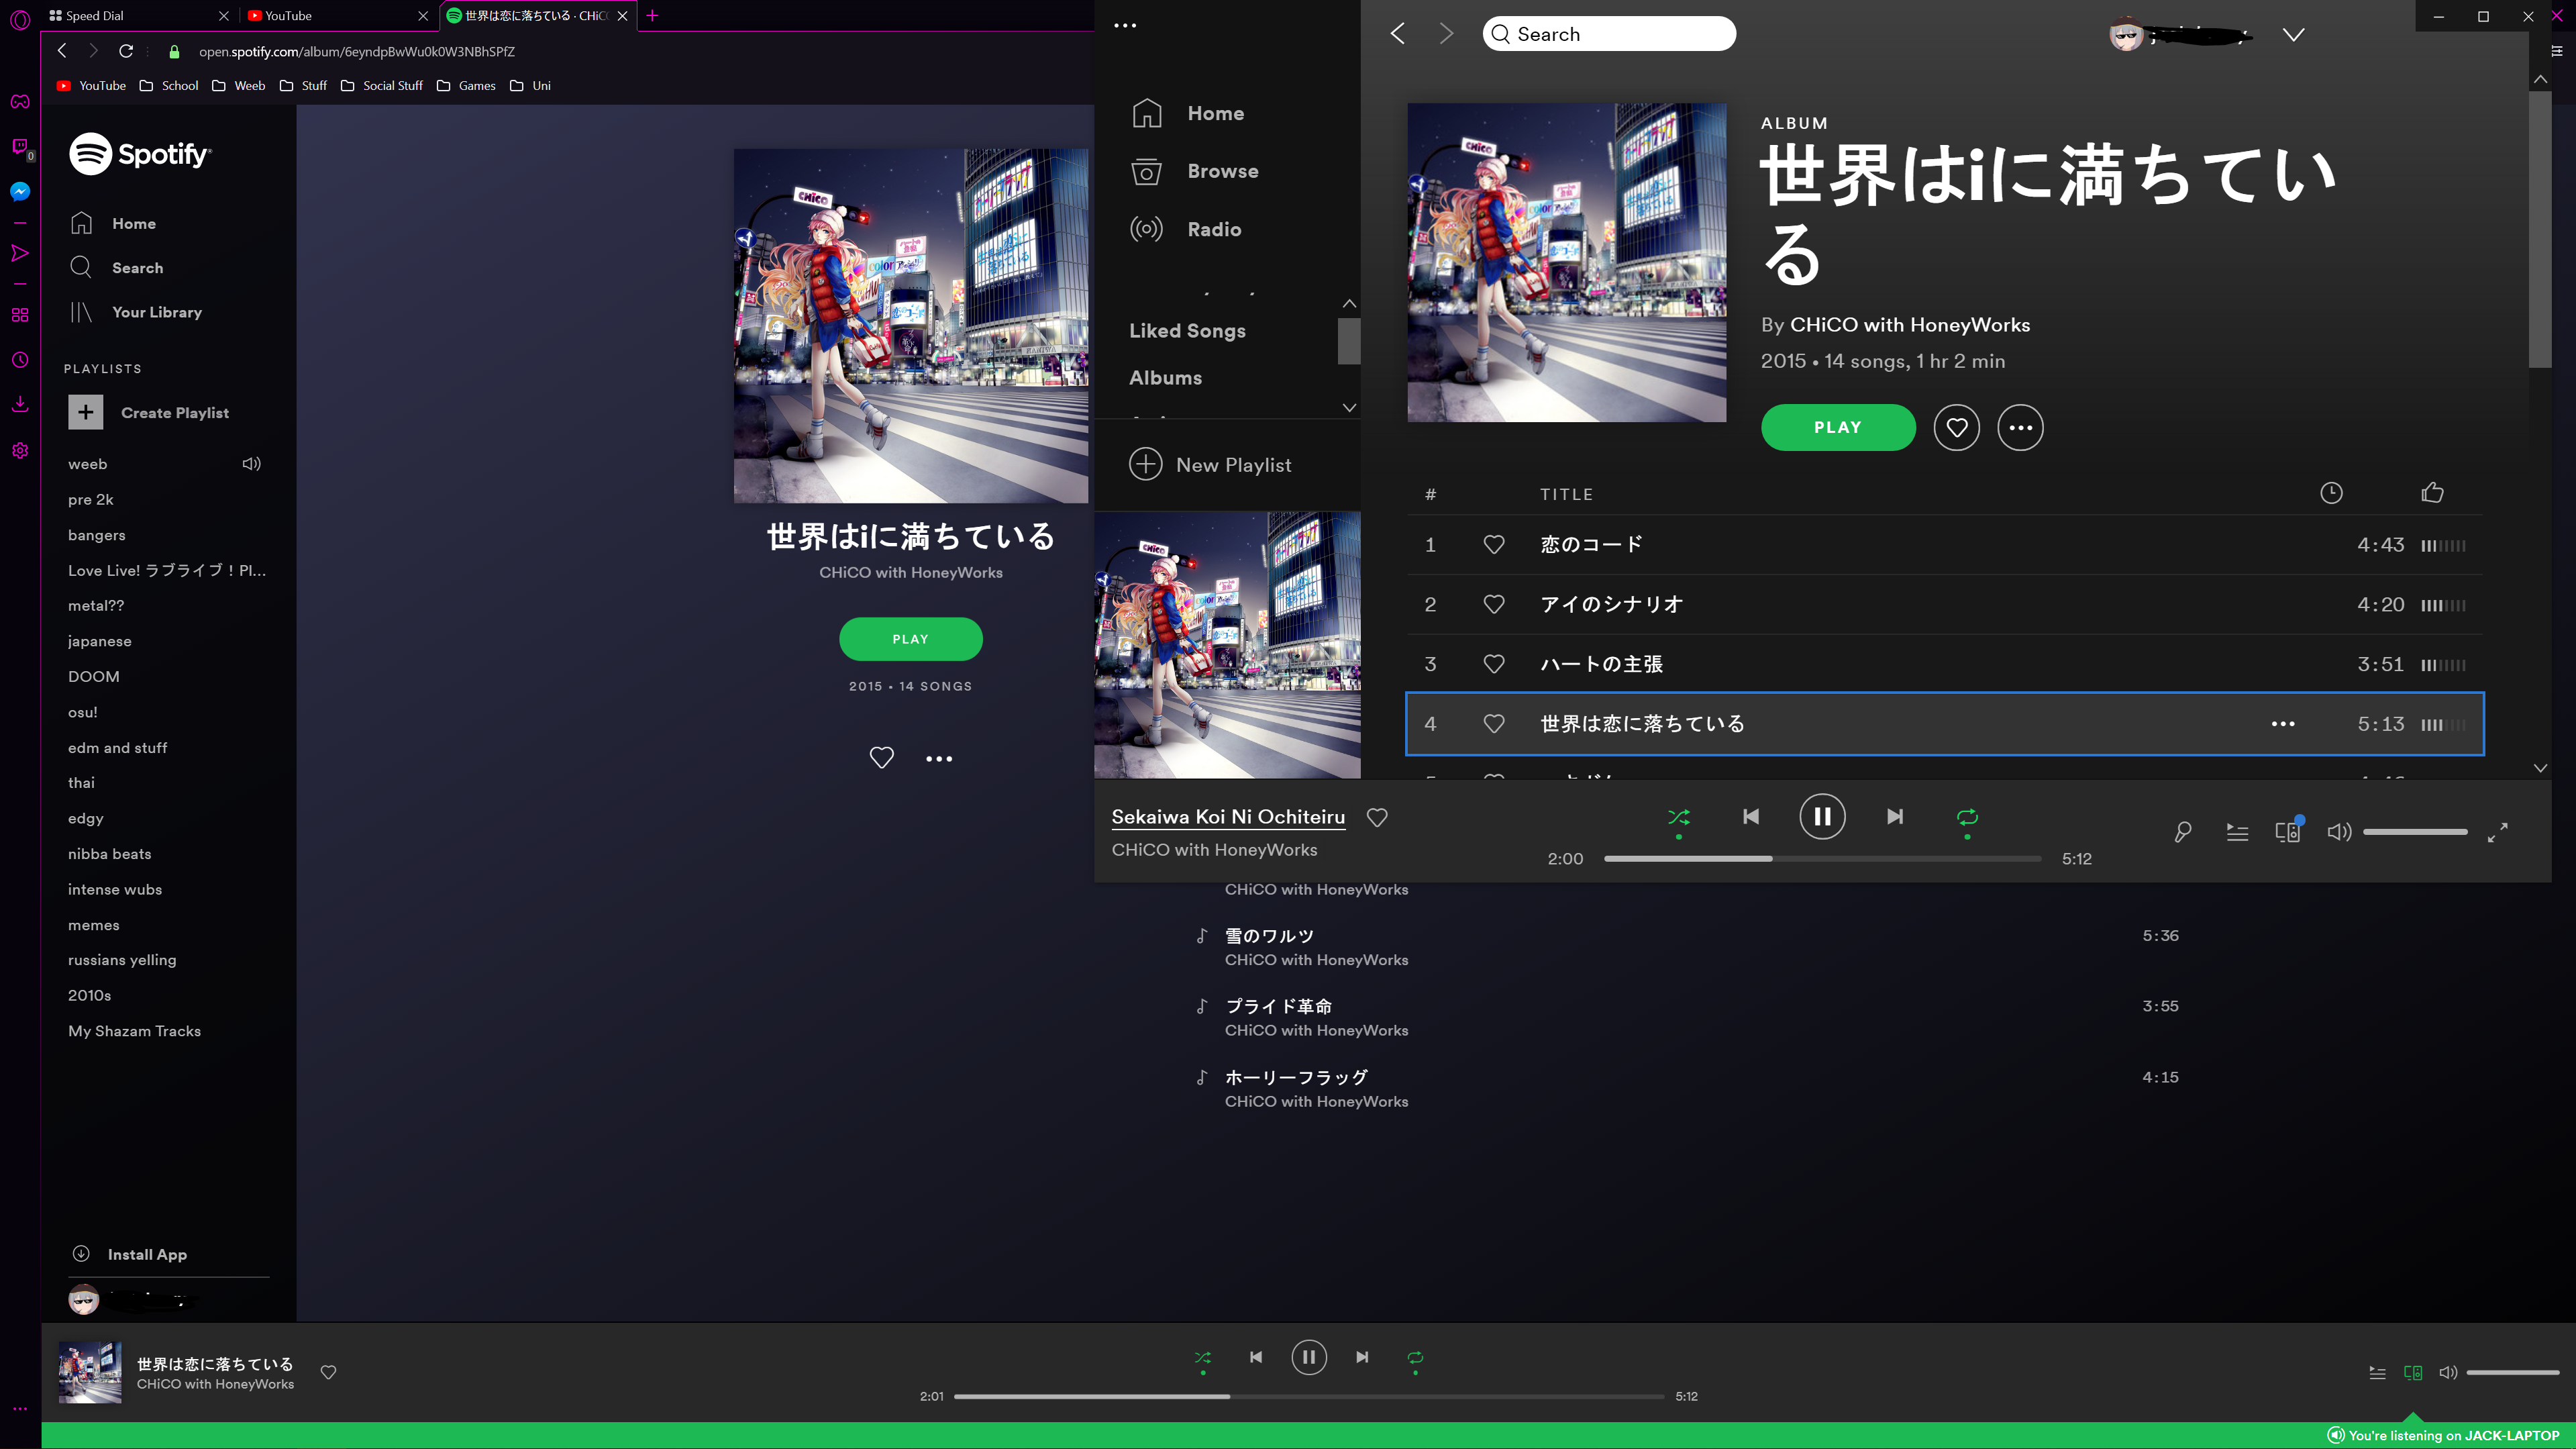 Why are some J-pop songs and albums listed with romaji or translated titles  on Spotify instead of Japanese? - Quora